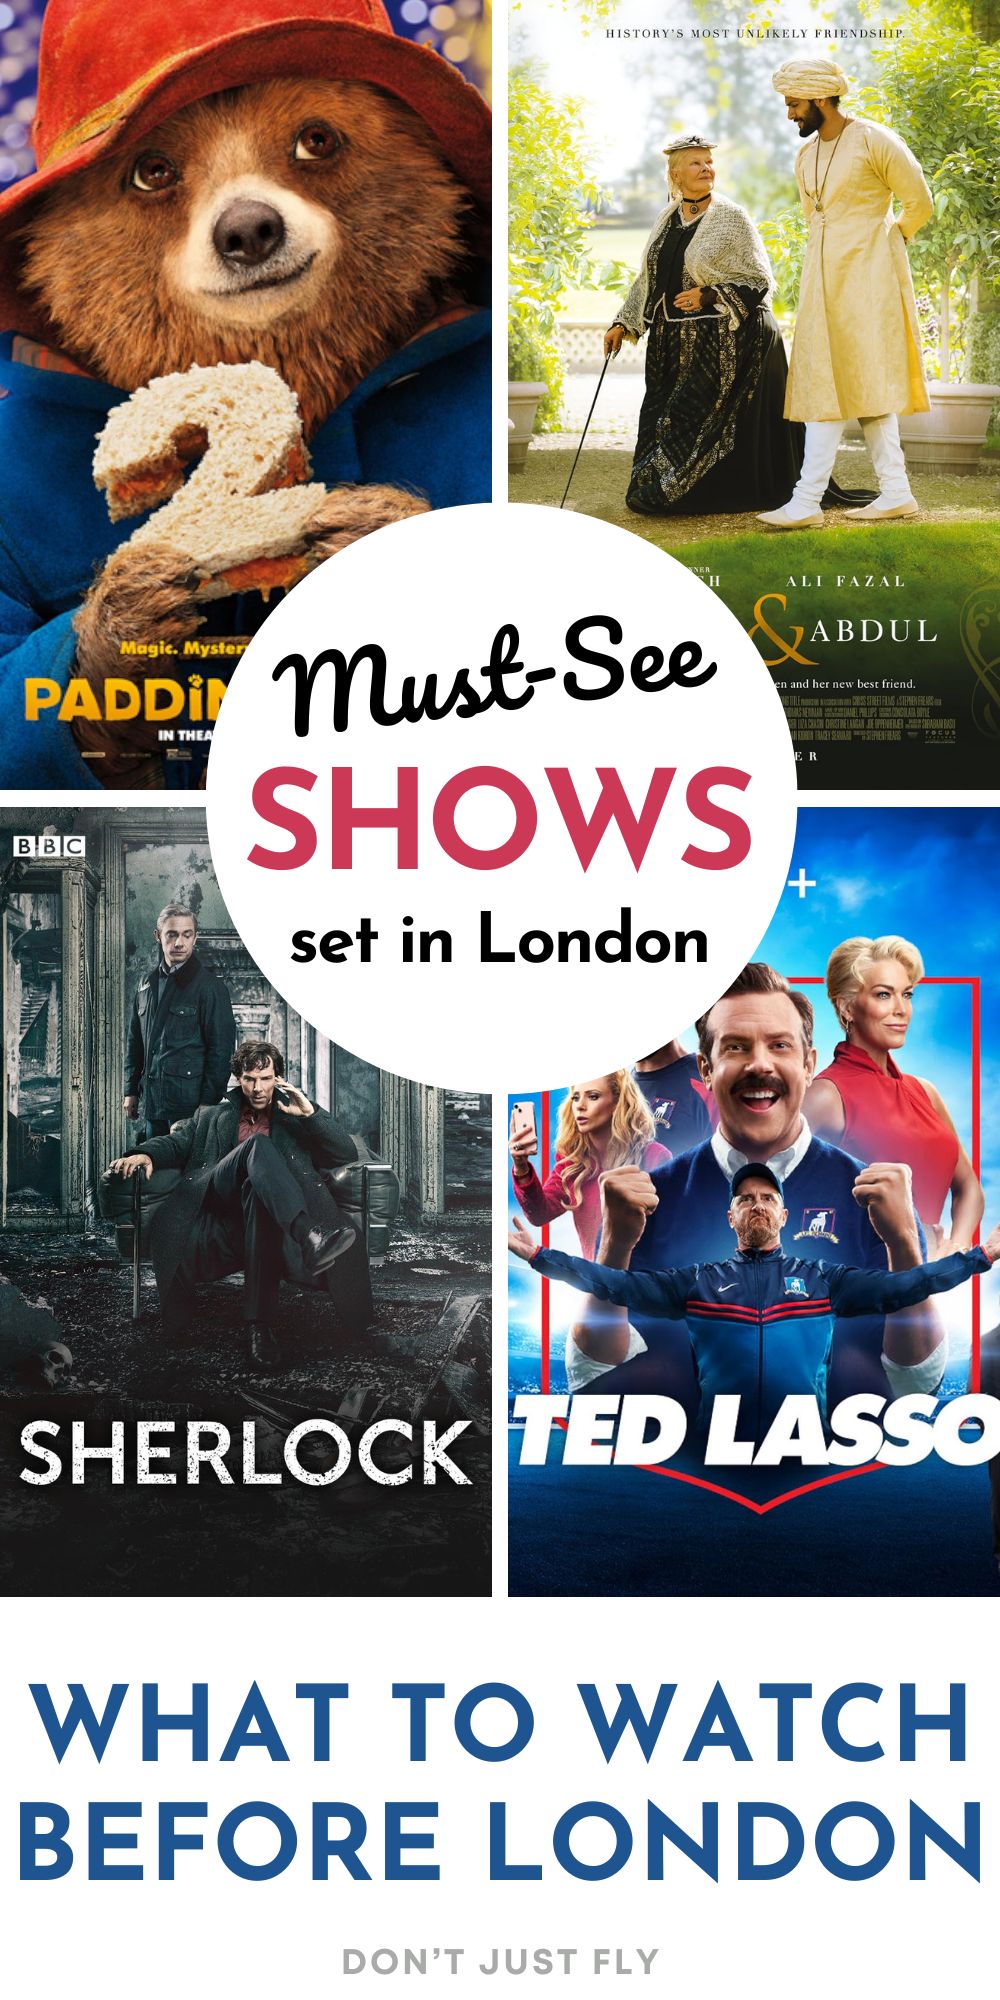 The photo collage shows several movie posters about London.